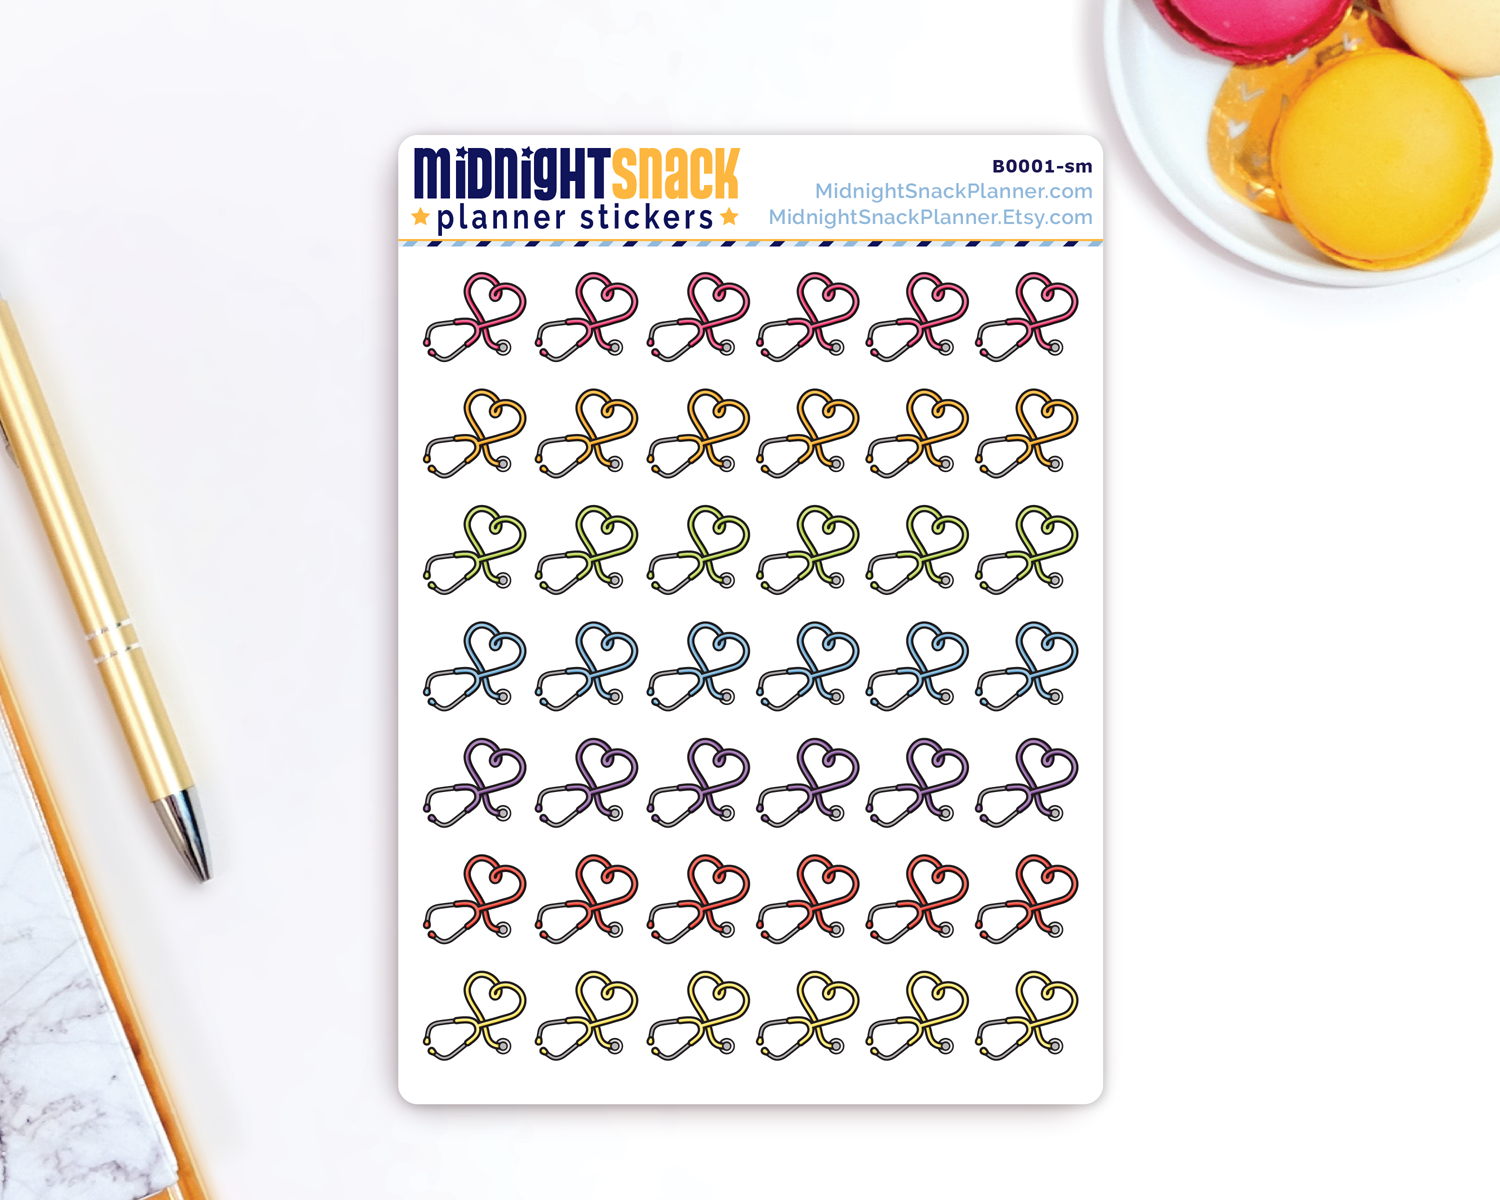 Stethoscope Icon: Doctor Appointment Reminder Planner Stickers